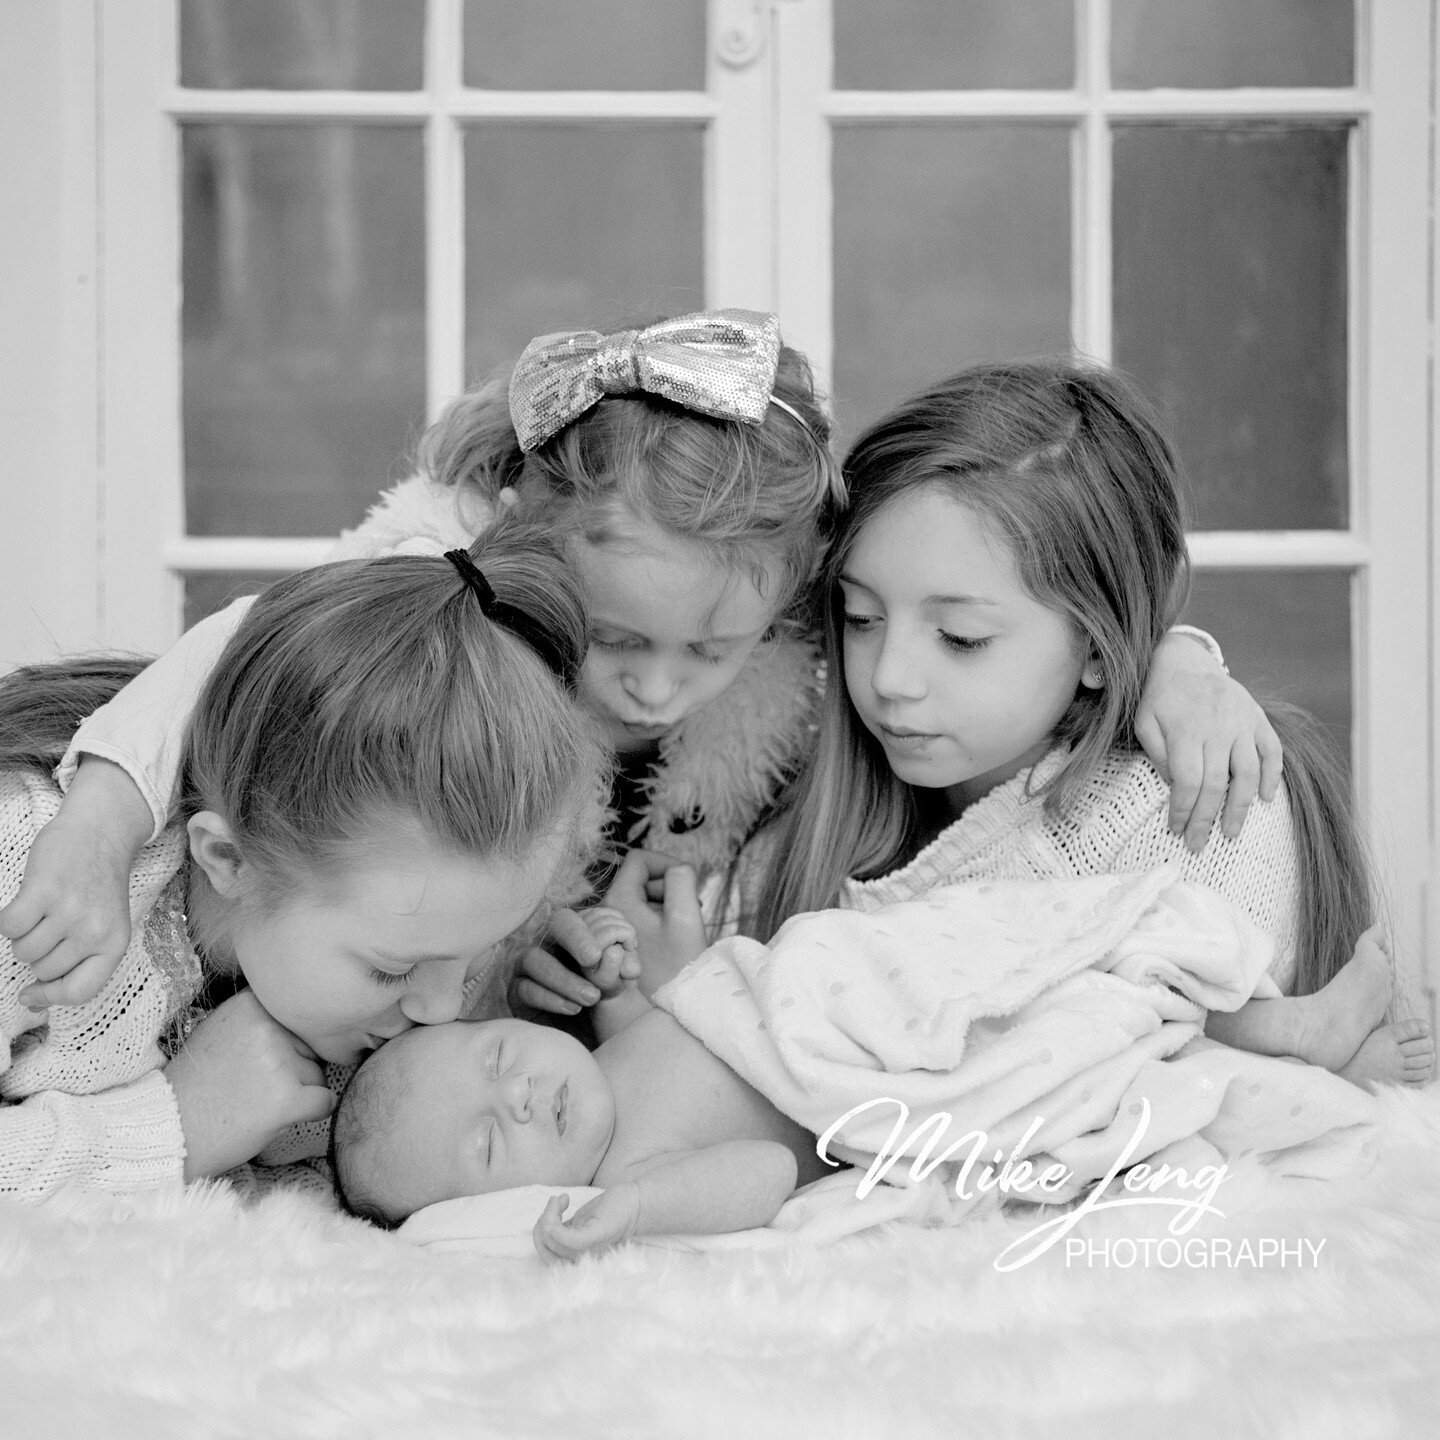 The Waterhouse Ladies, Ava, Beau, Clemmie and Hettie captured three years ago, such Gorgeous girls .Looking forward to seeing them again shortly for their update .Making memories to cherish forever .⁠
.⁠
www.mike-leng.co.uk⁠
#mikelengphotography  #wa